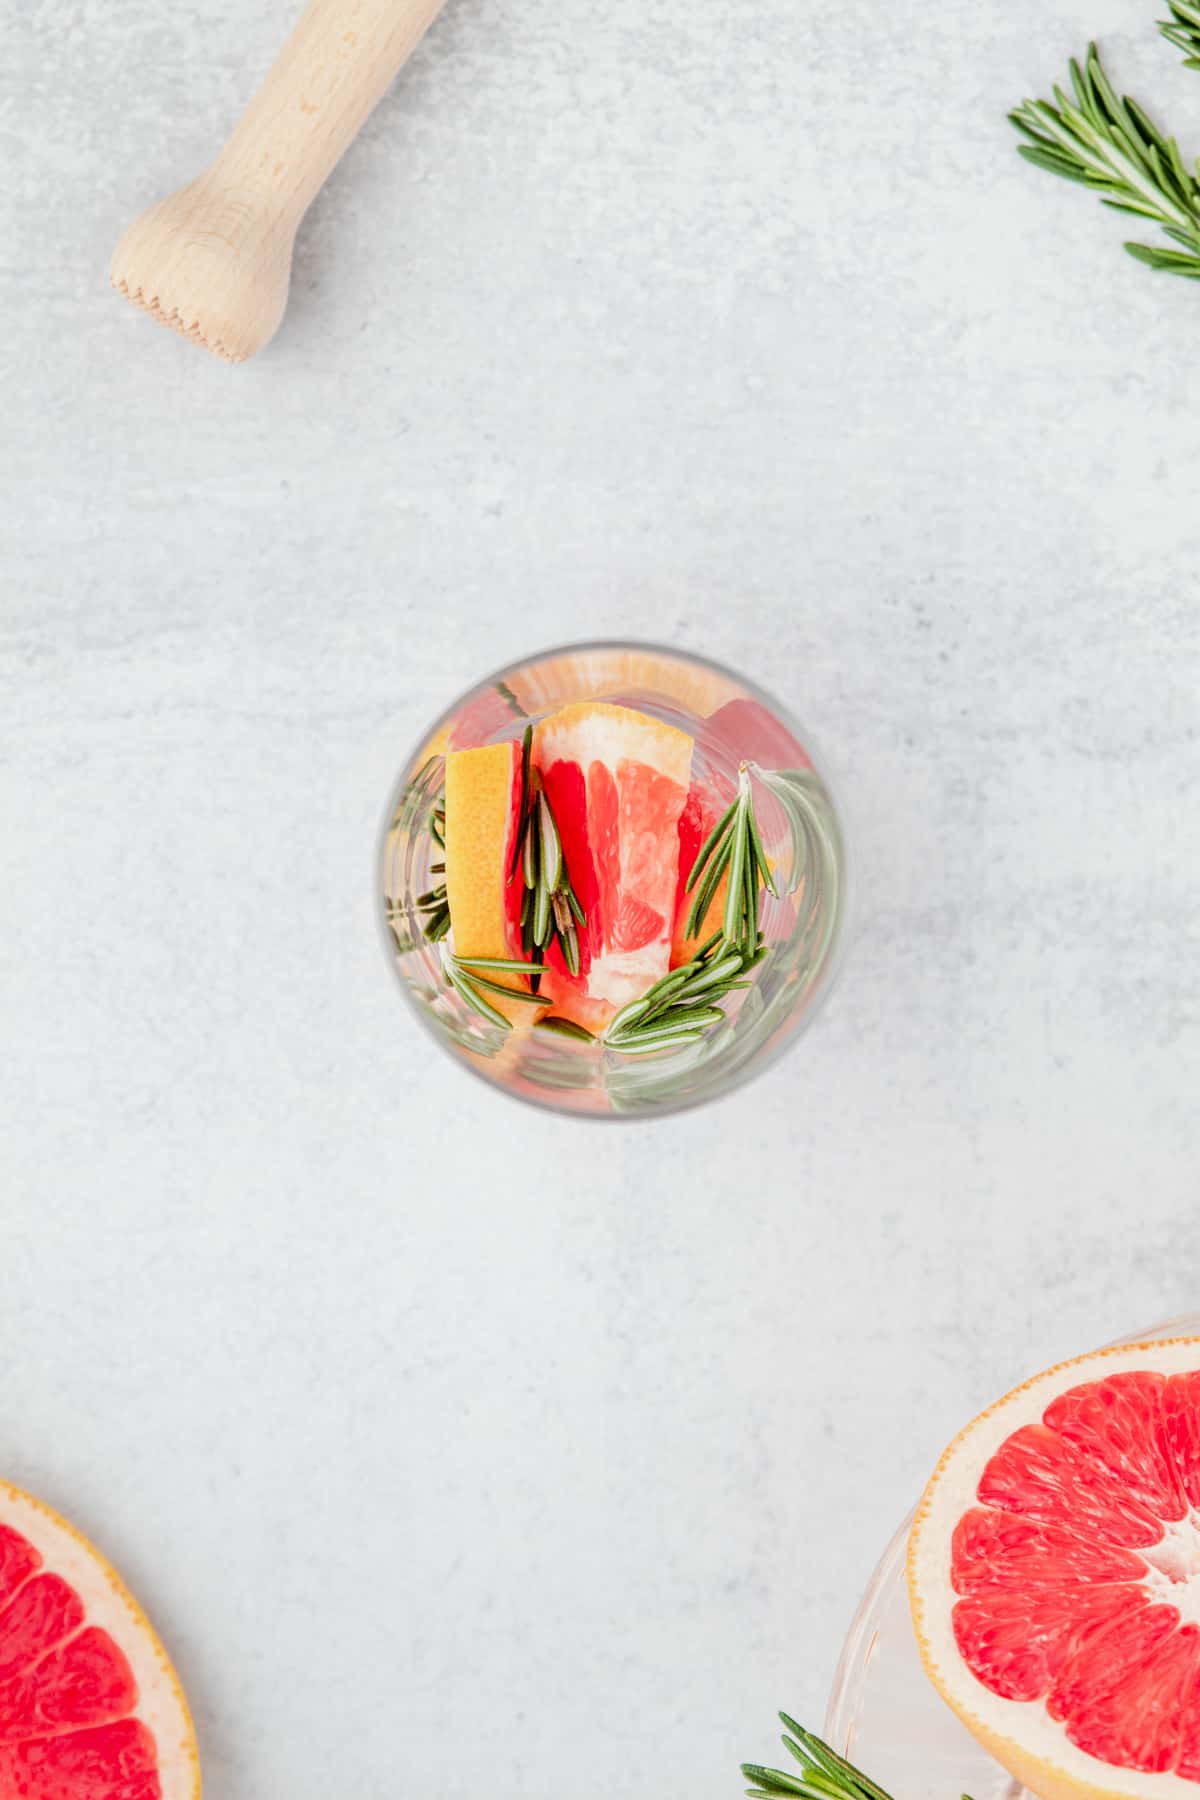 Grapefruit wedges and rosemary in a glass.